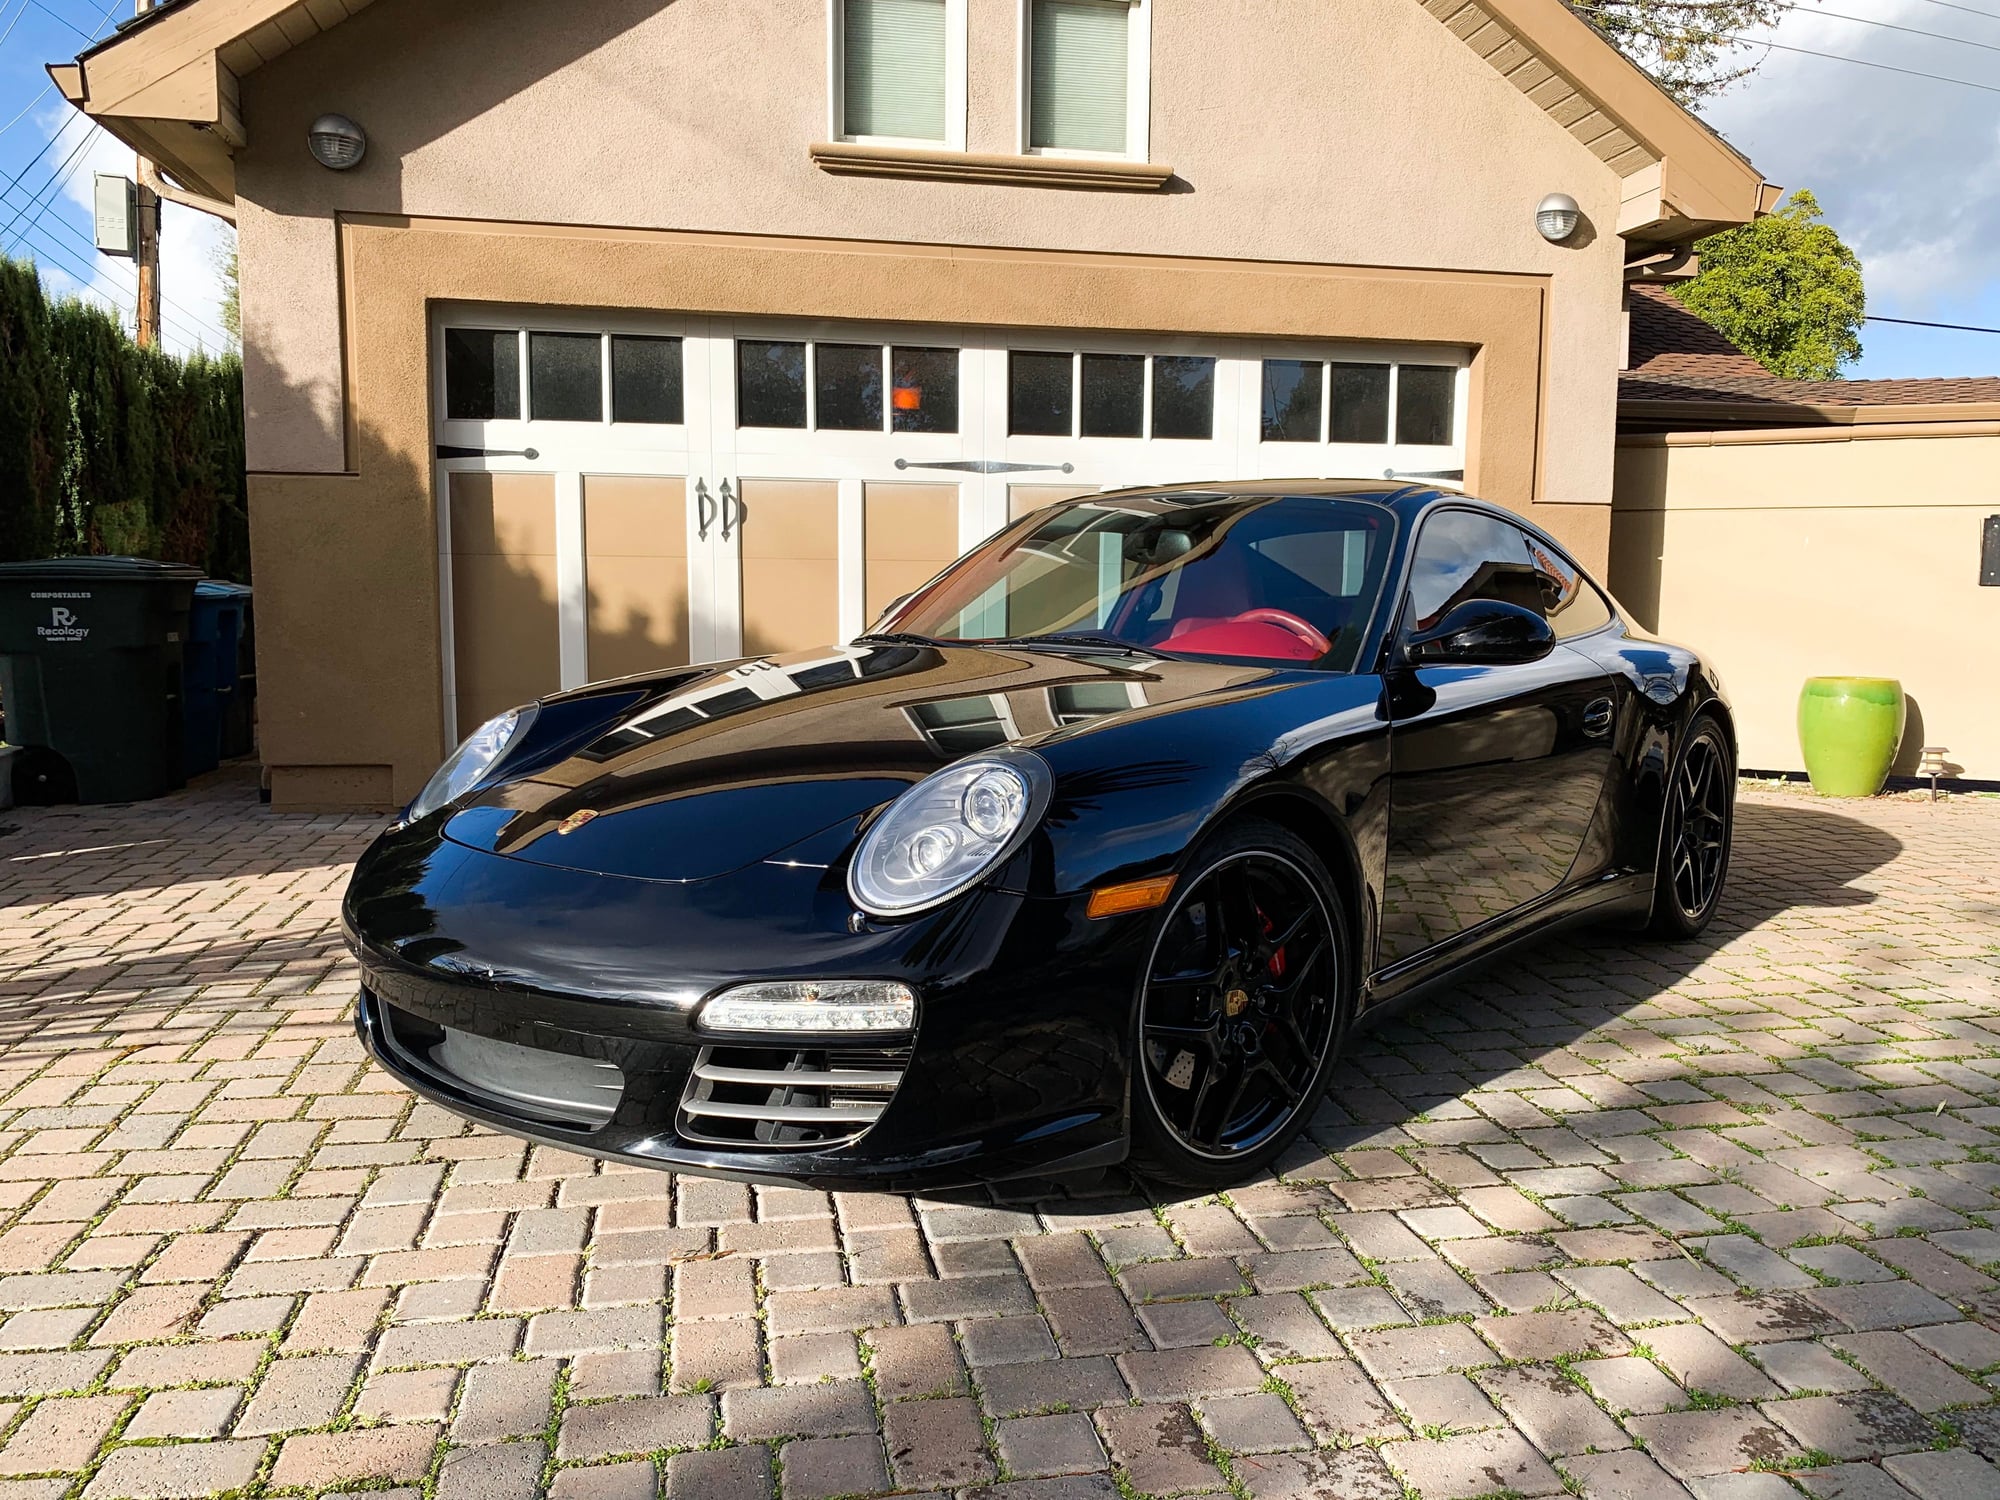 2010 Porsche 911 - 2010 C4S, 19k miles w/ 6spd. RARE red full leather interior with Alcantra and CF trim - Used - VIN WP0AB2A9XAS720371 - 19,320 Miles - 6 cyl - AWD - Manual - Coupe - Black - Cupertino, CA 94087, United States